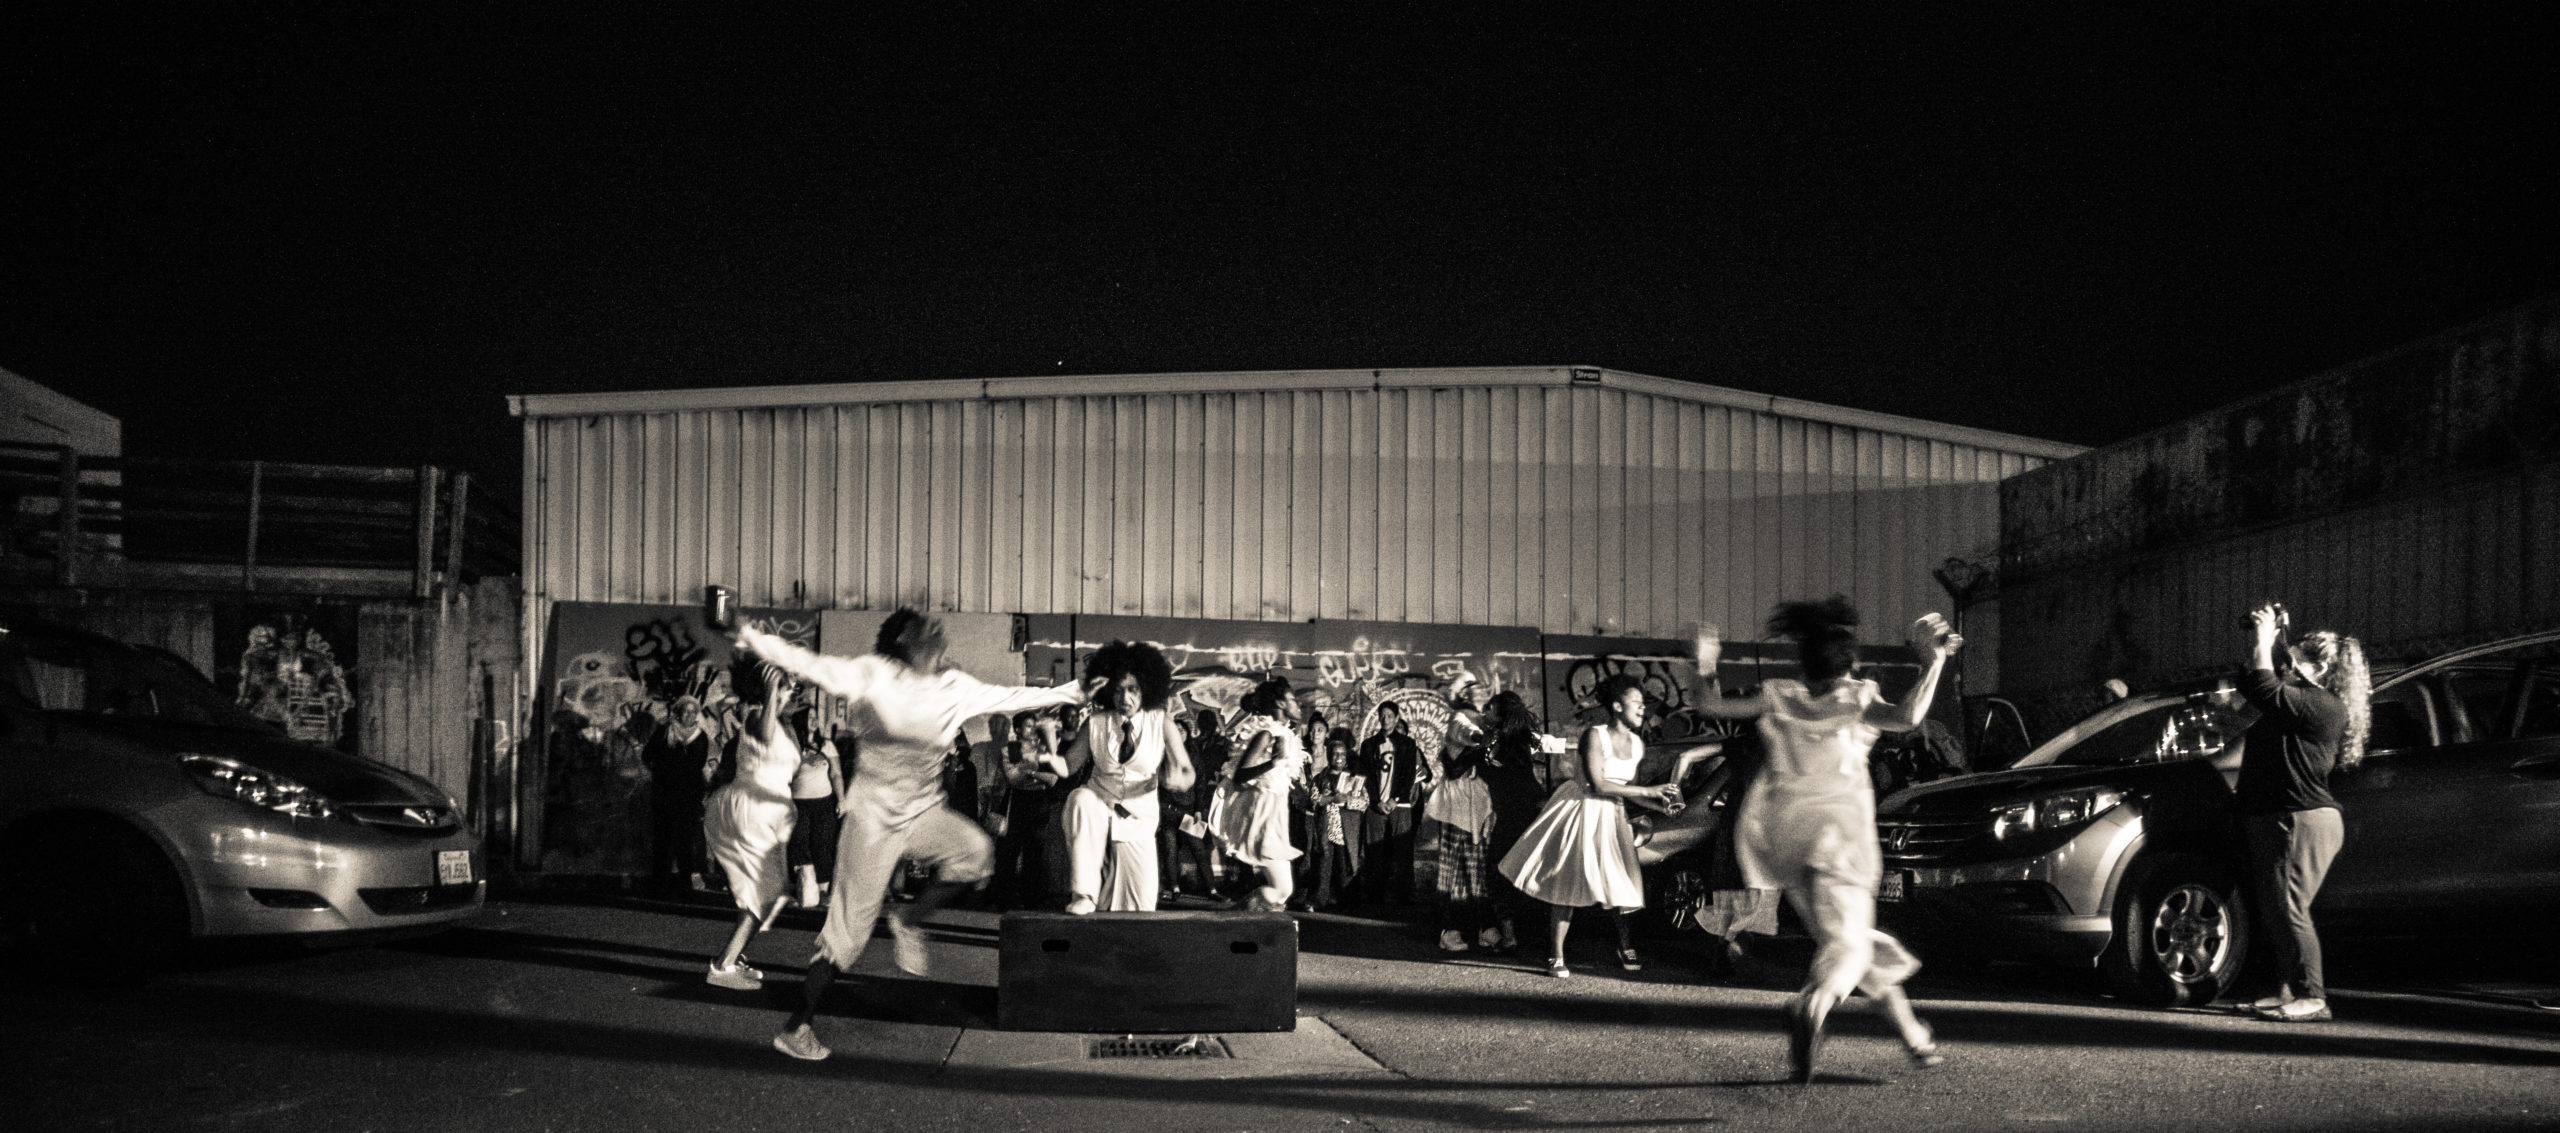 [Image description: Group of performers clothed in different variations of white dresses, pants, shirts, and skirts dancing in a parking lot between several cars. One woman with big curly hair, in a white pantsuit with a black tie steps up onto a box in the middle of the circle.]